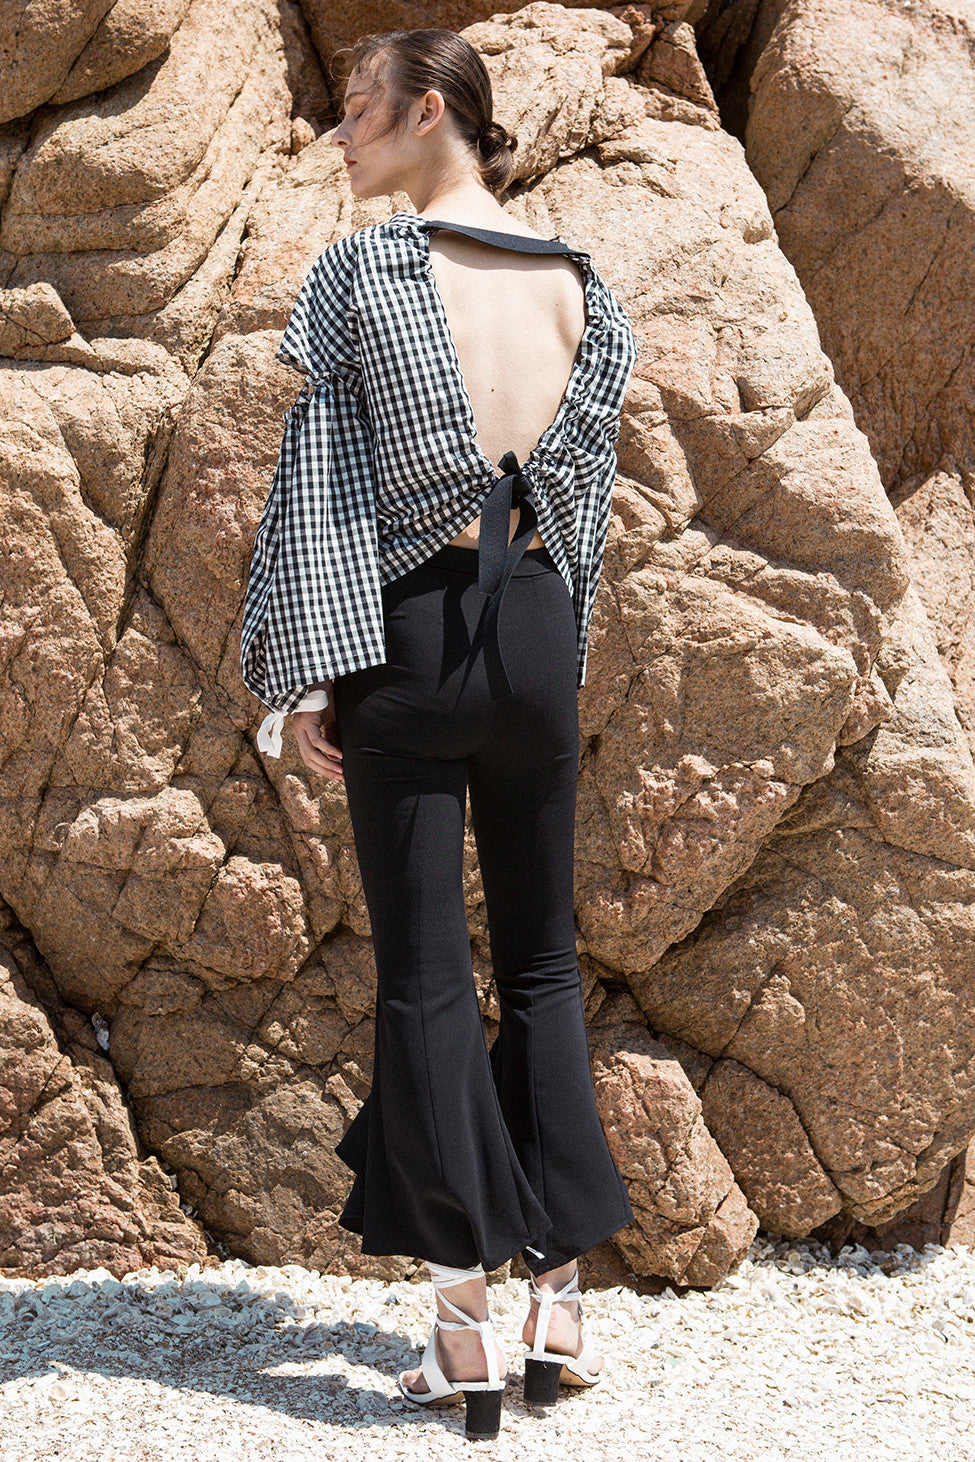 The Faroe Pant in Black featuring mid-rise peplum draped ruffle on leg. Centre concealed zip and hook and bar closure. 